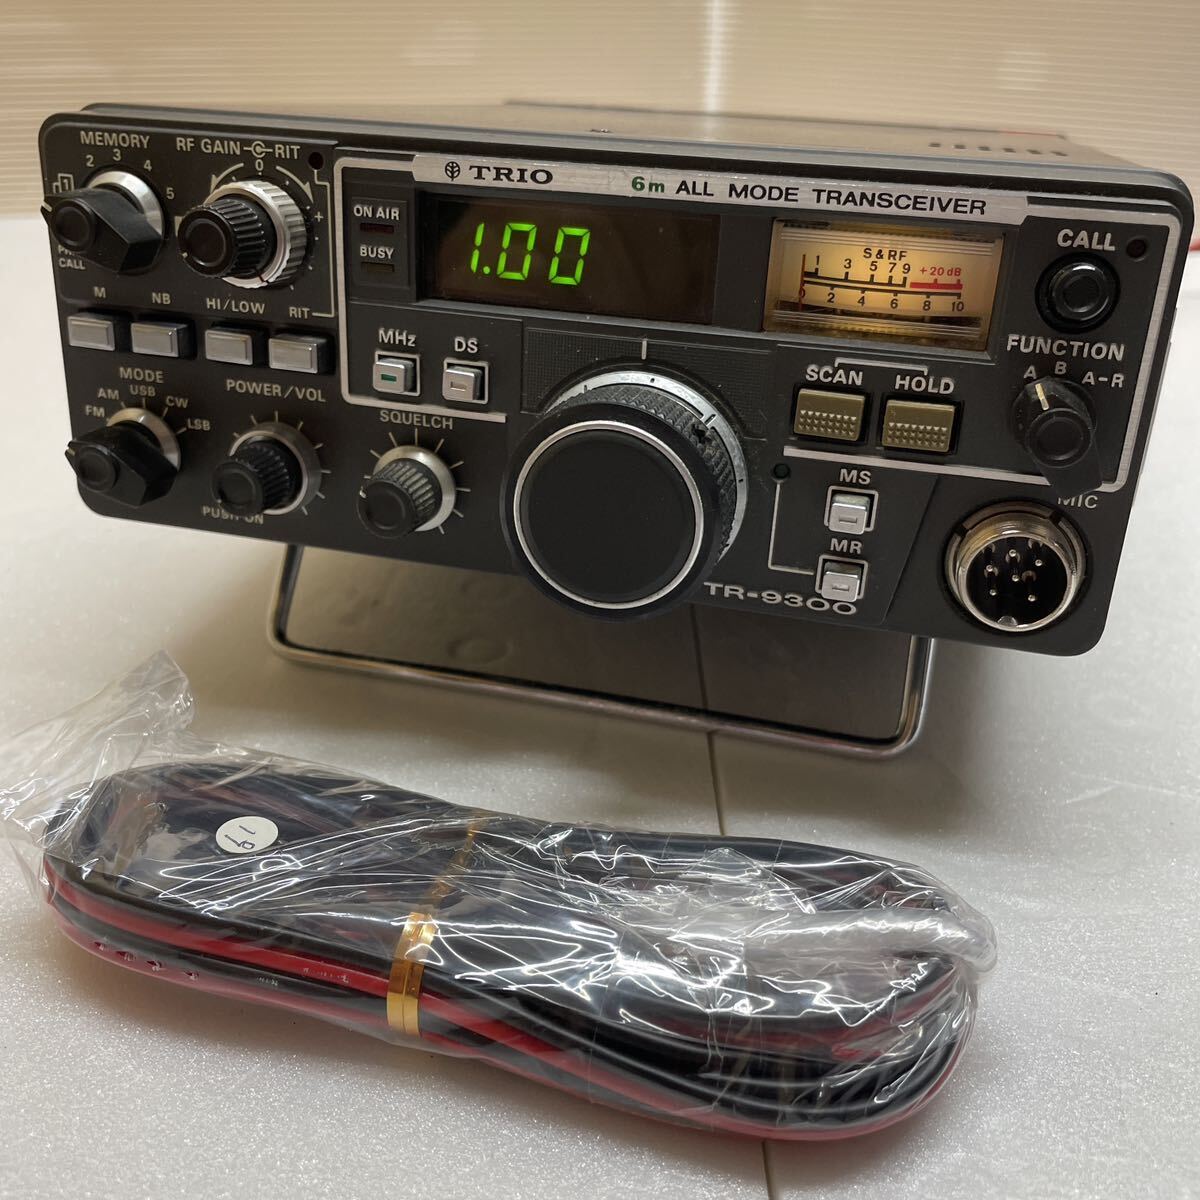 [ working properly goods ] TR-9300 KENWOOD TRIO Kenwood Trio 10W 50MHz transceiver transceiver ham disassembly cleaning being completed 